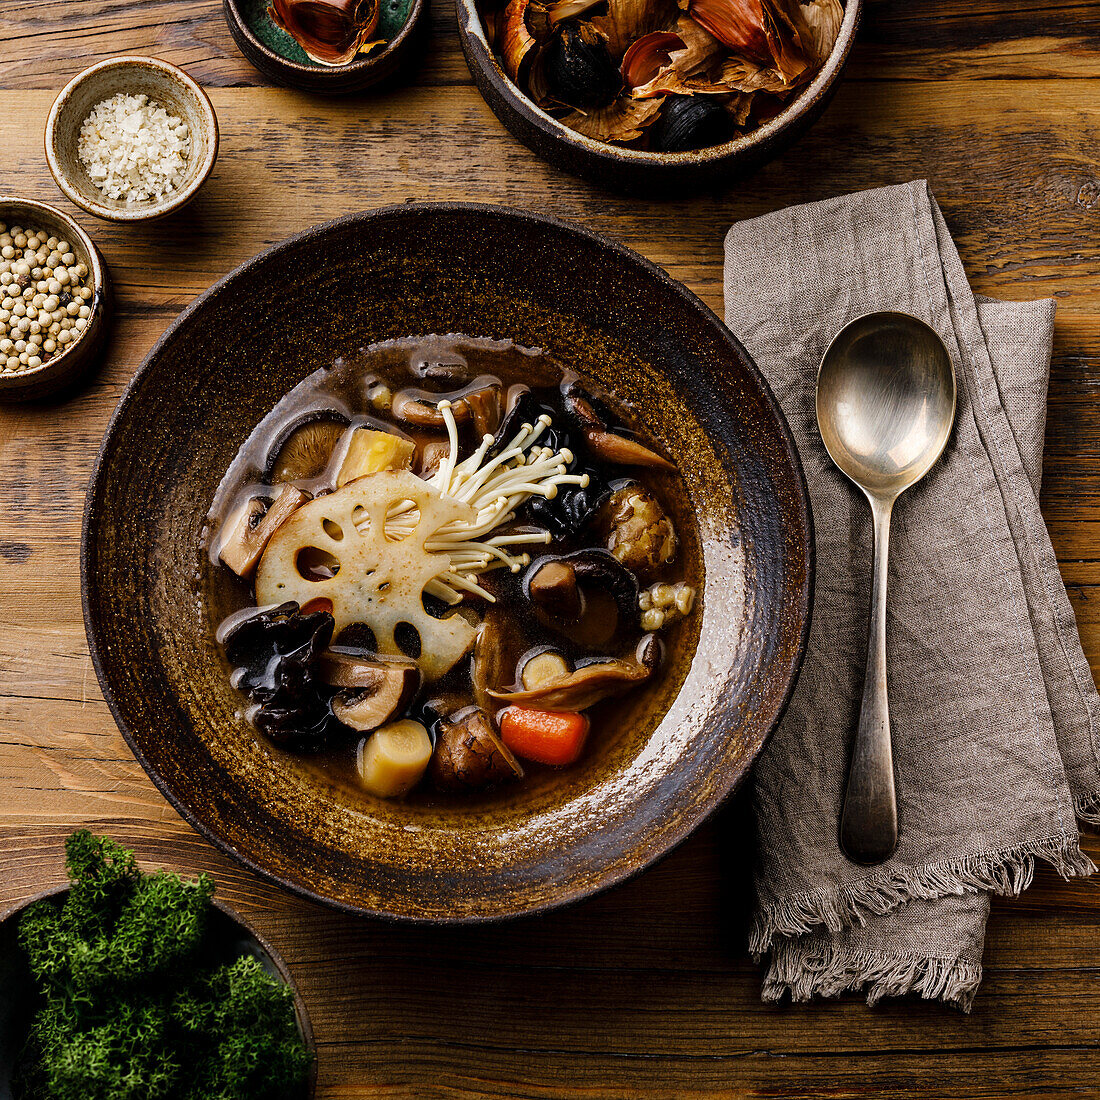 Healing soup with roots, mushrooms and barley on wooden table background